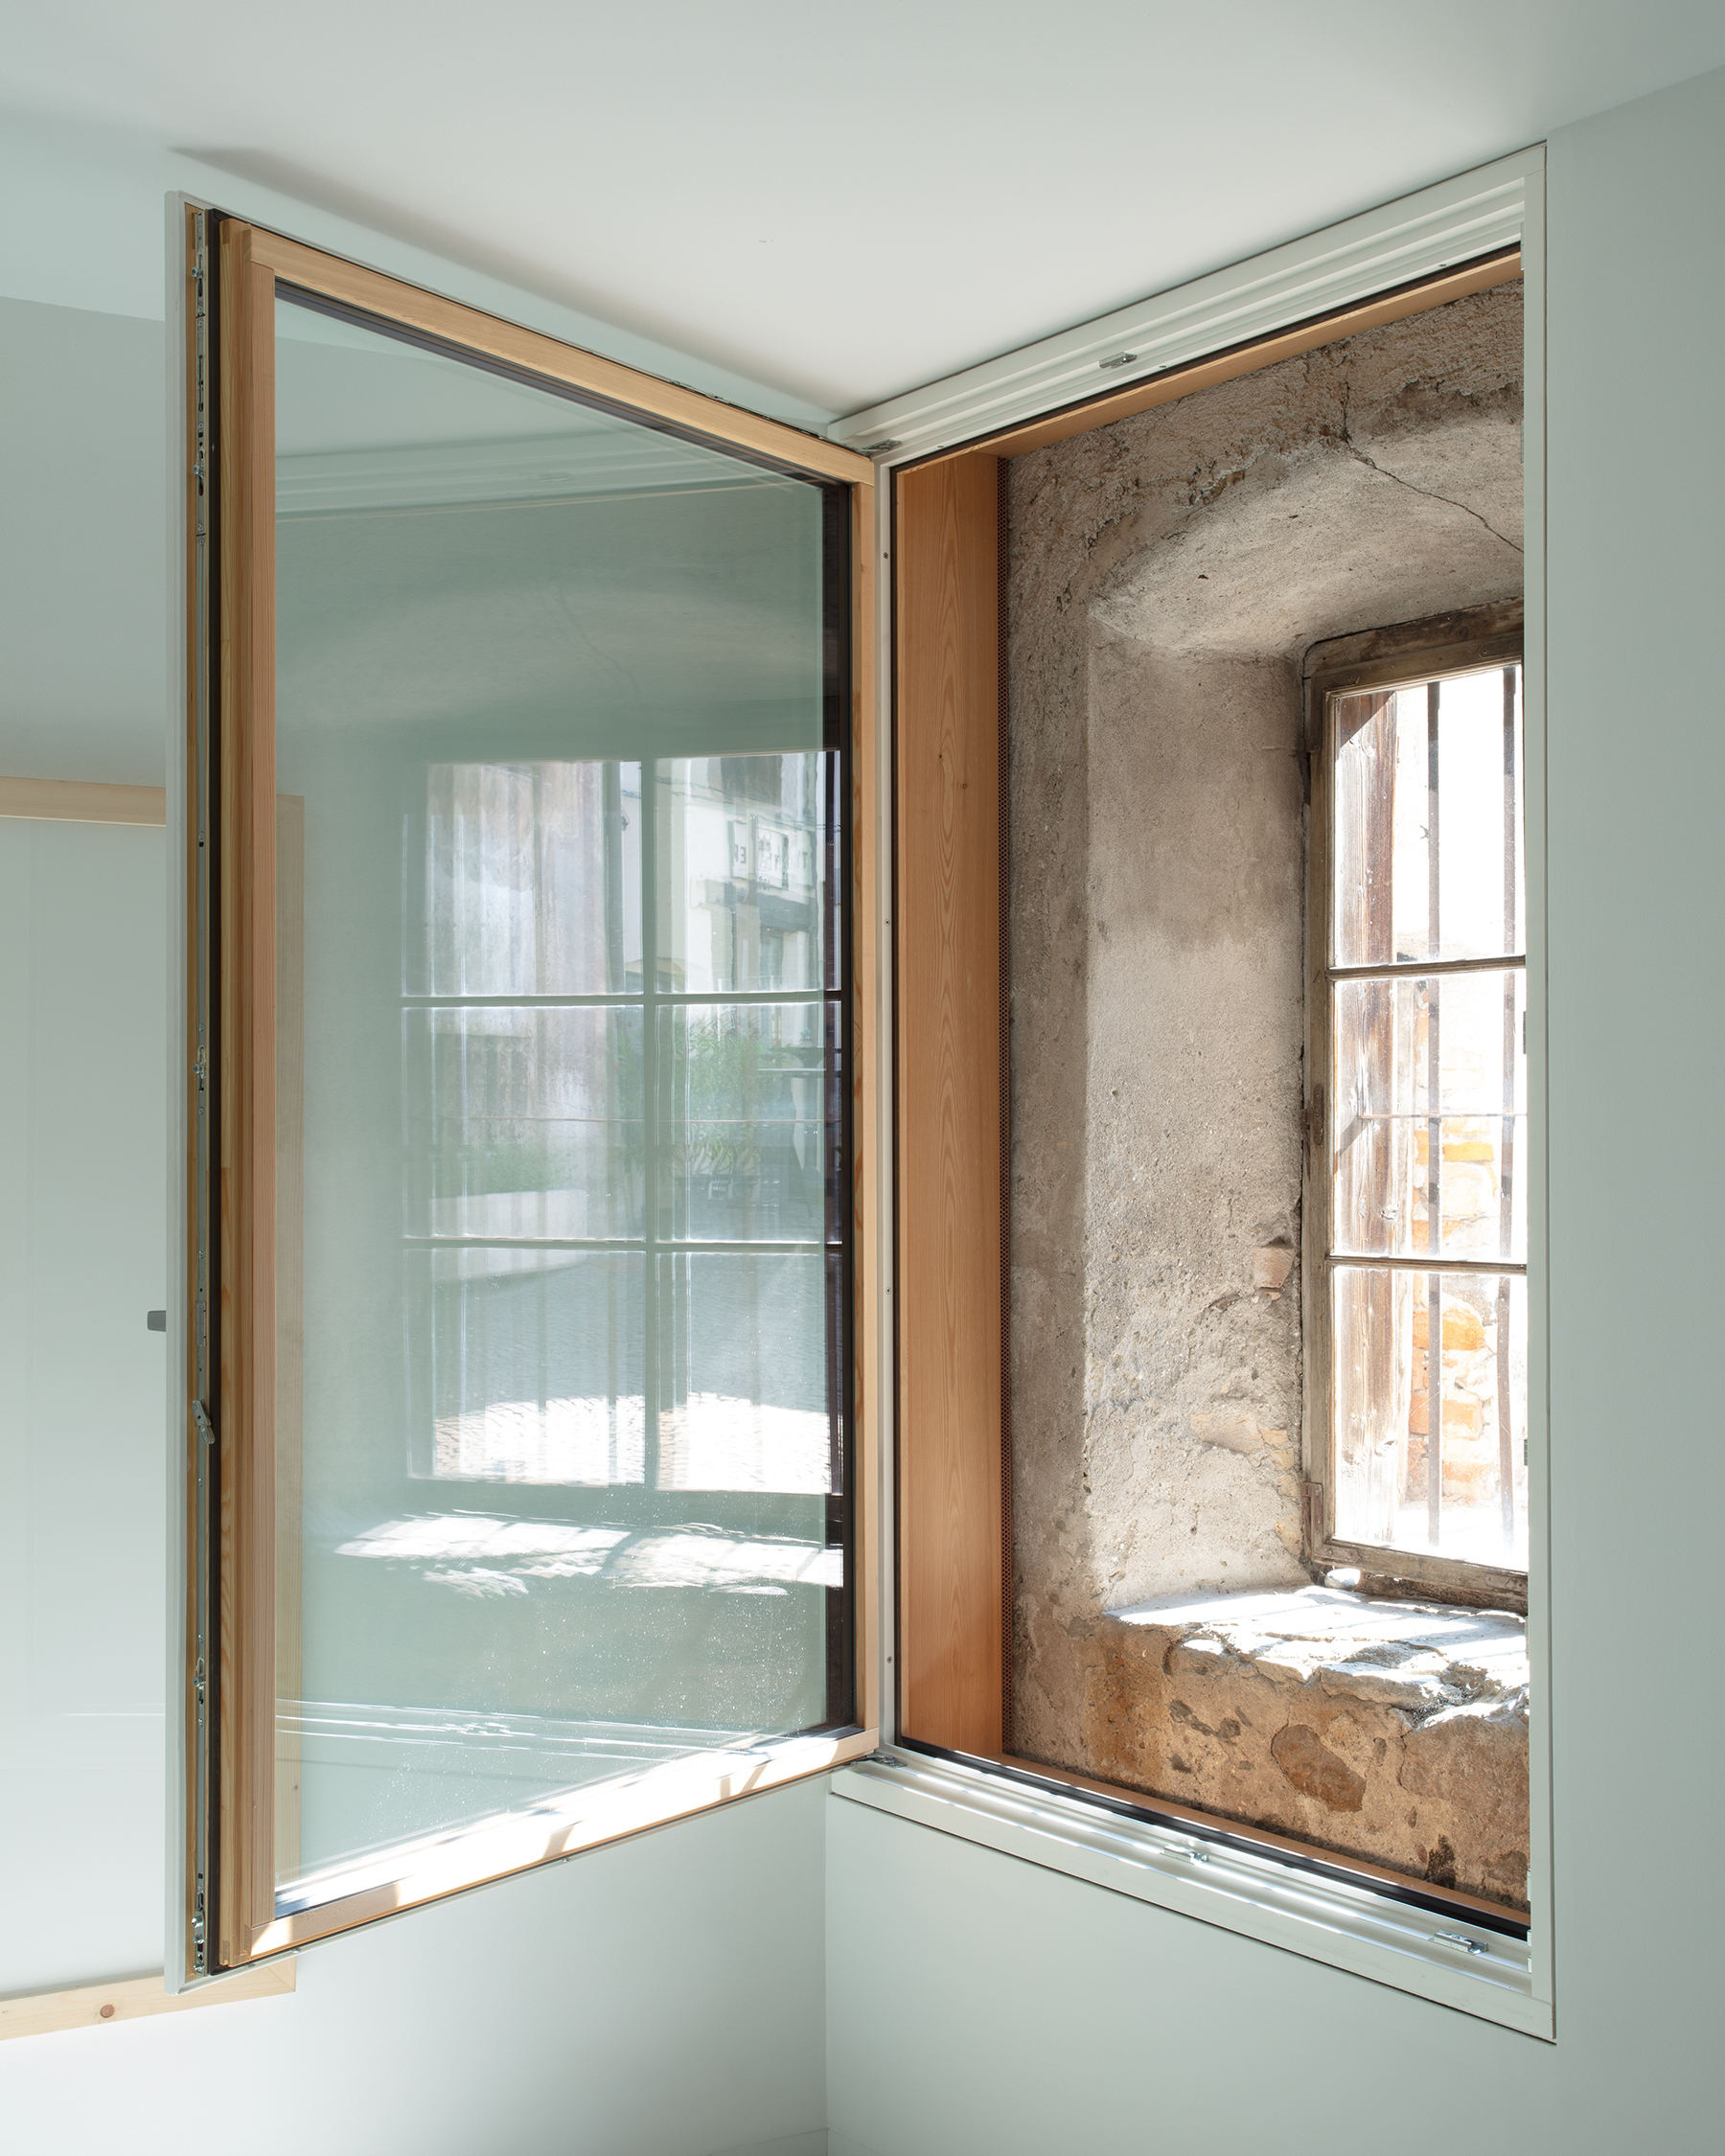 The window is one source of air circulation and light for the room